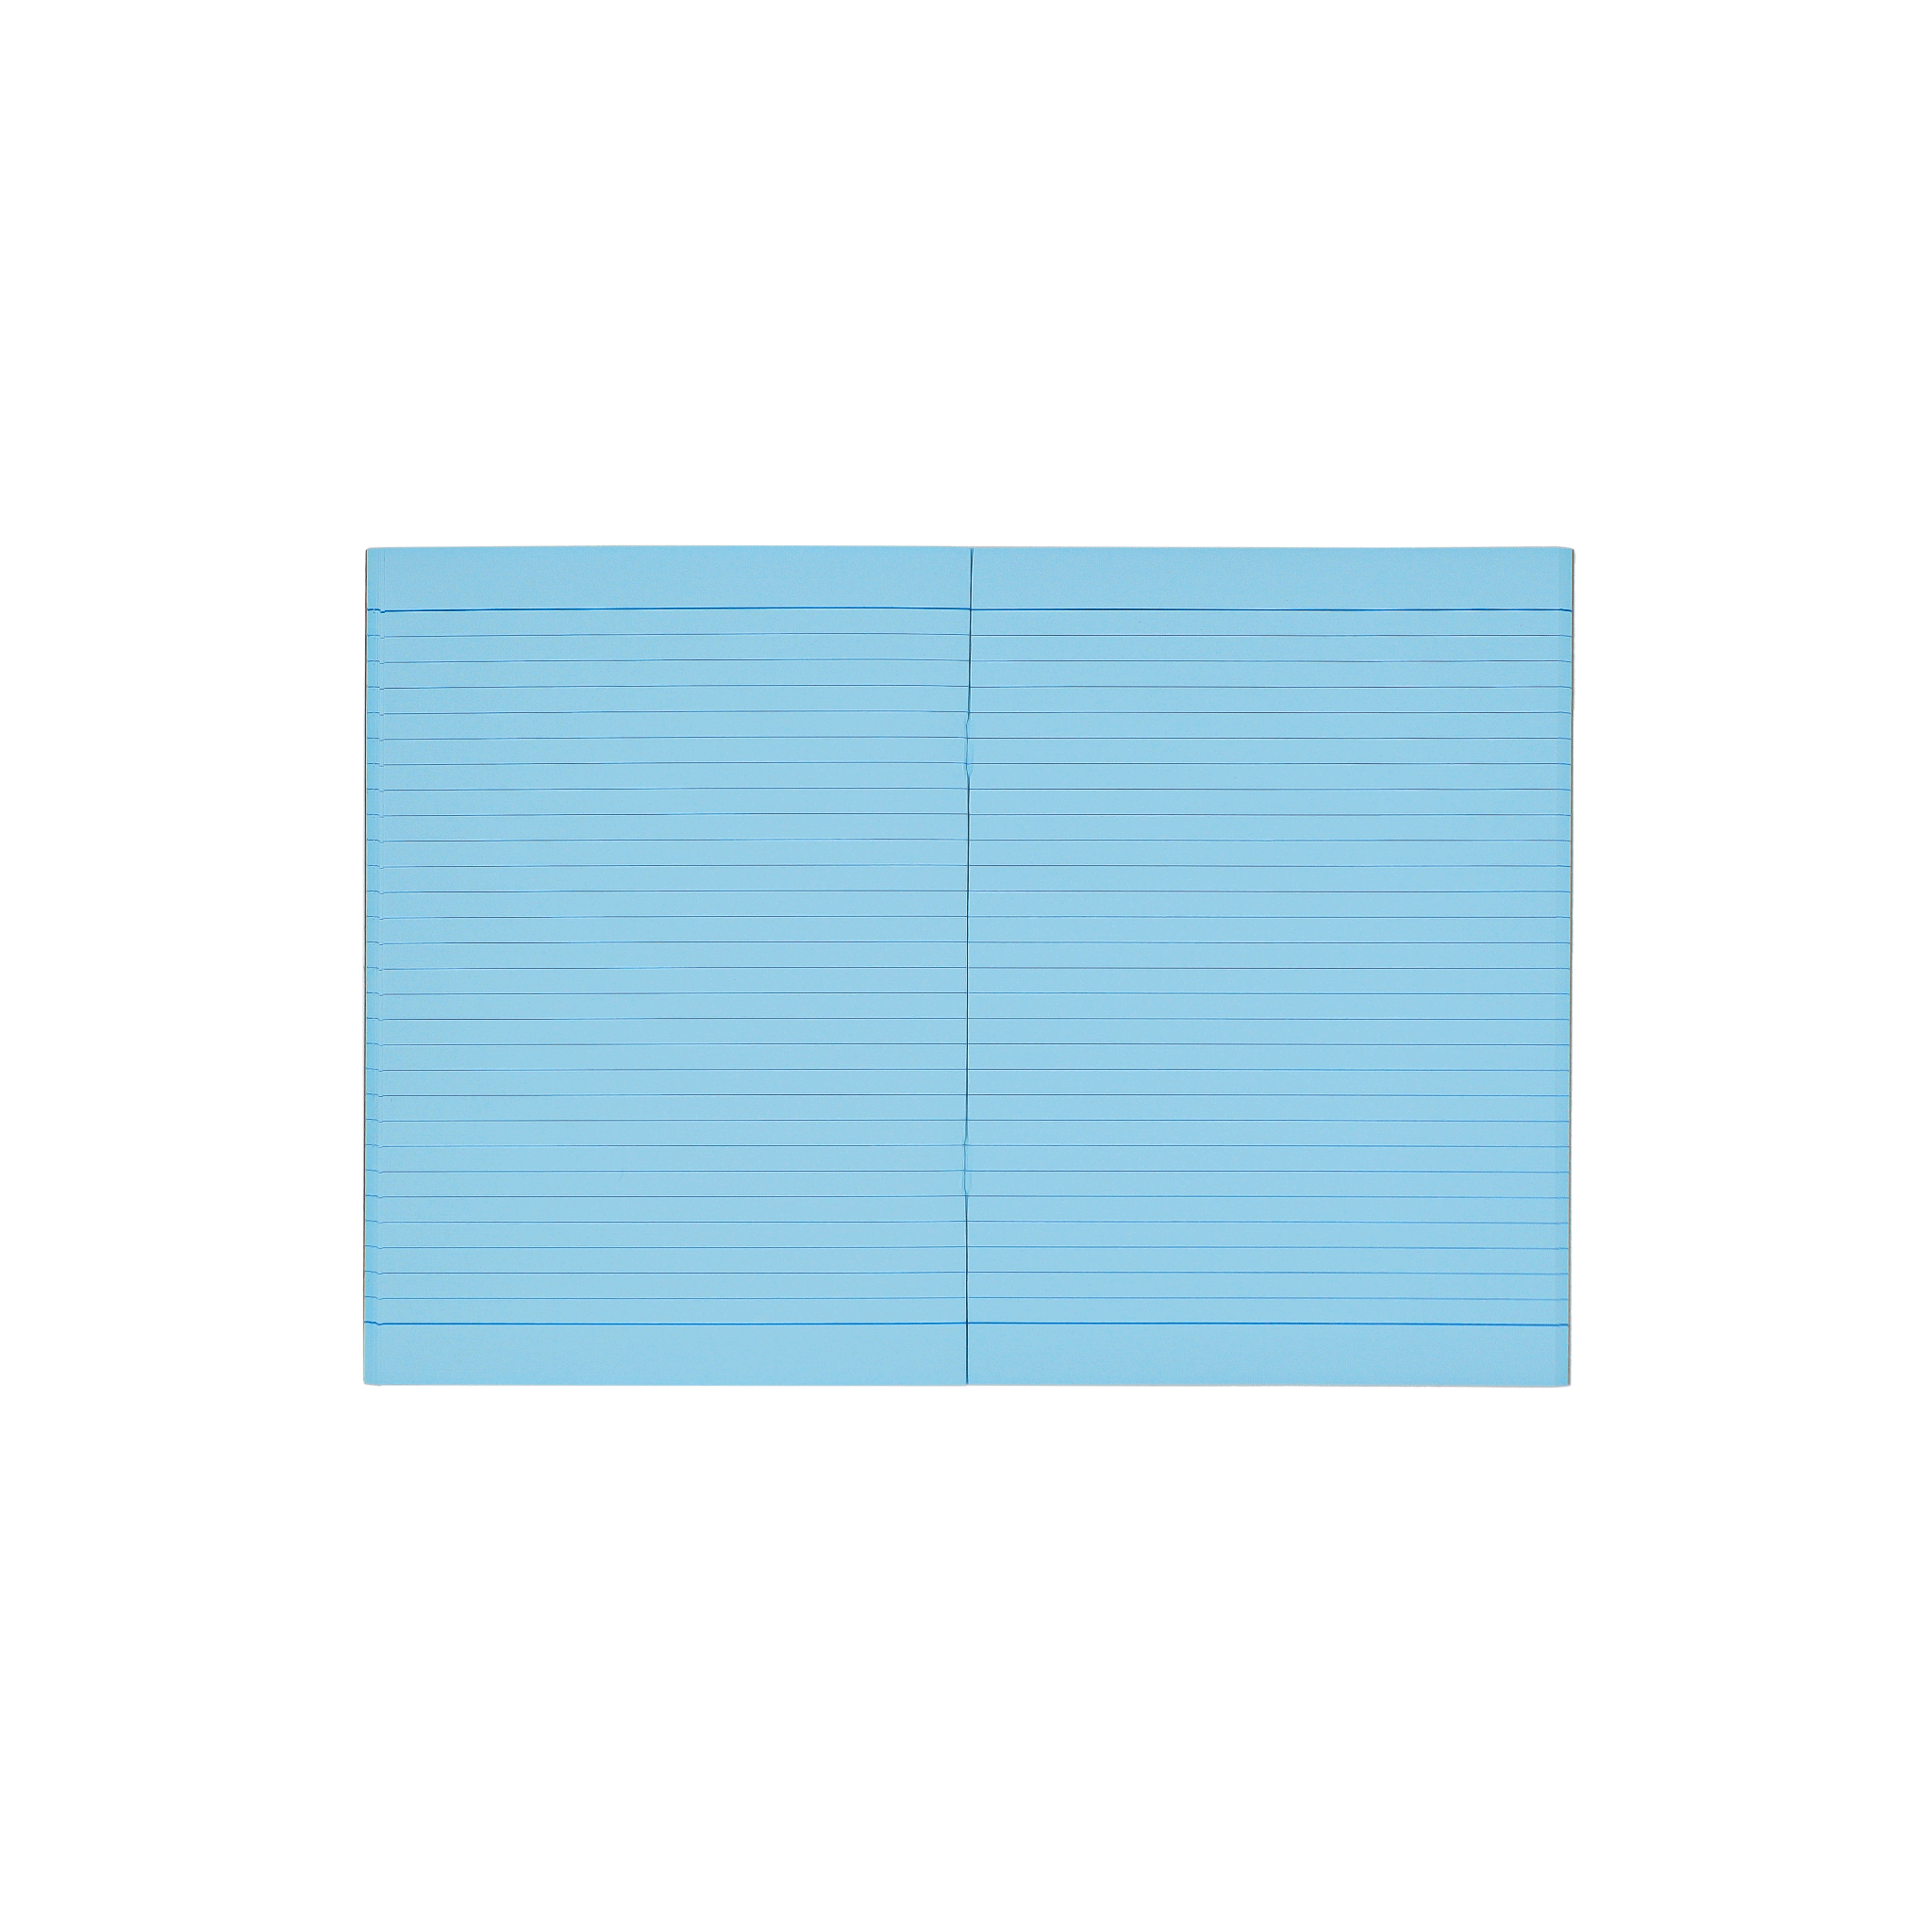 Socolo notebook, open showing its blue paper pages, lined with blue ink. 